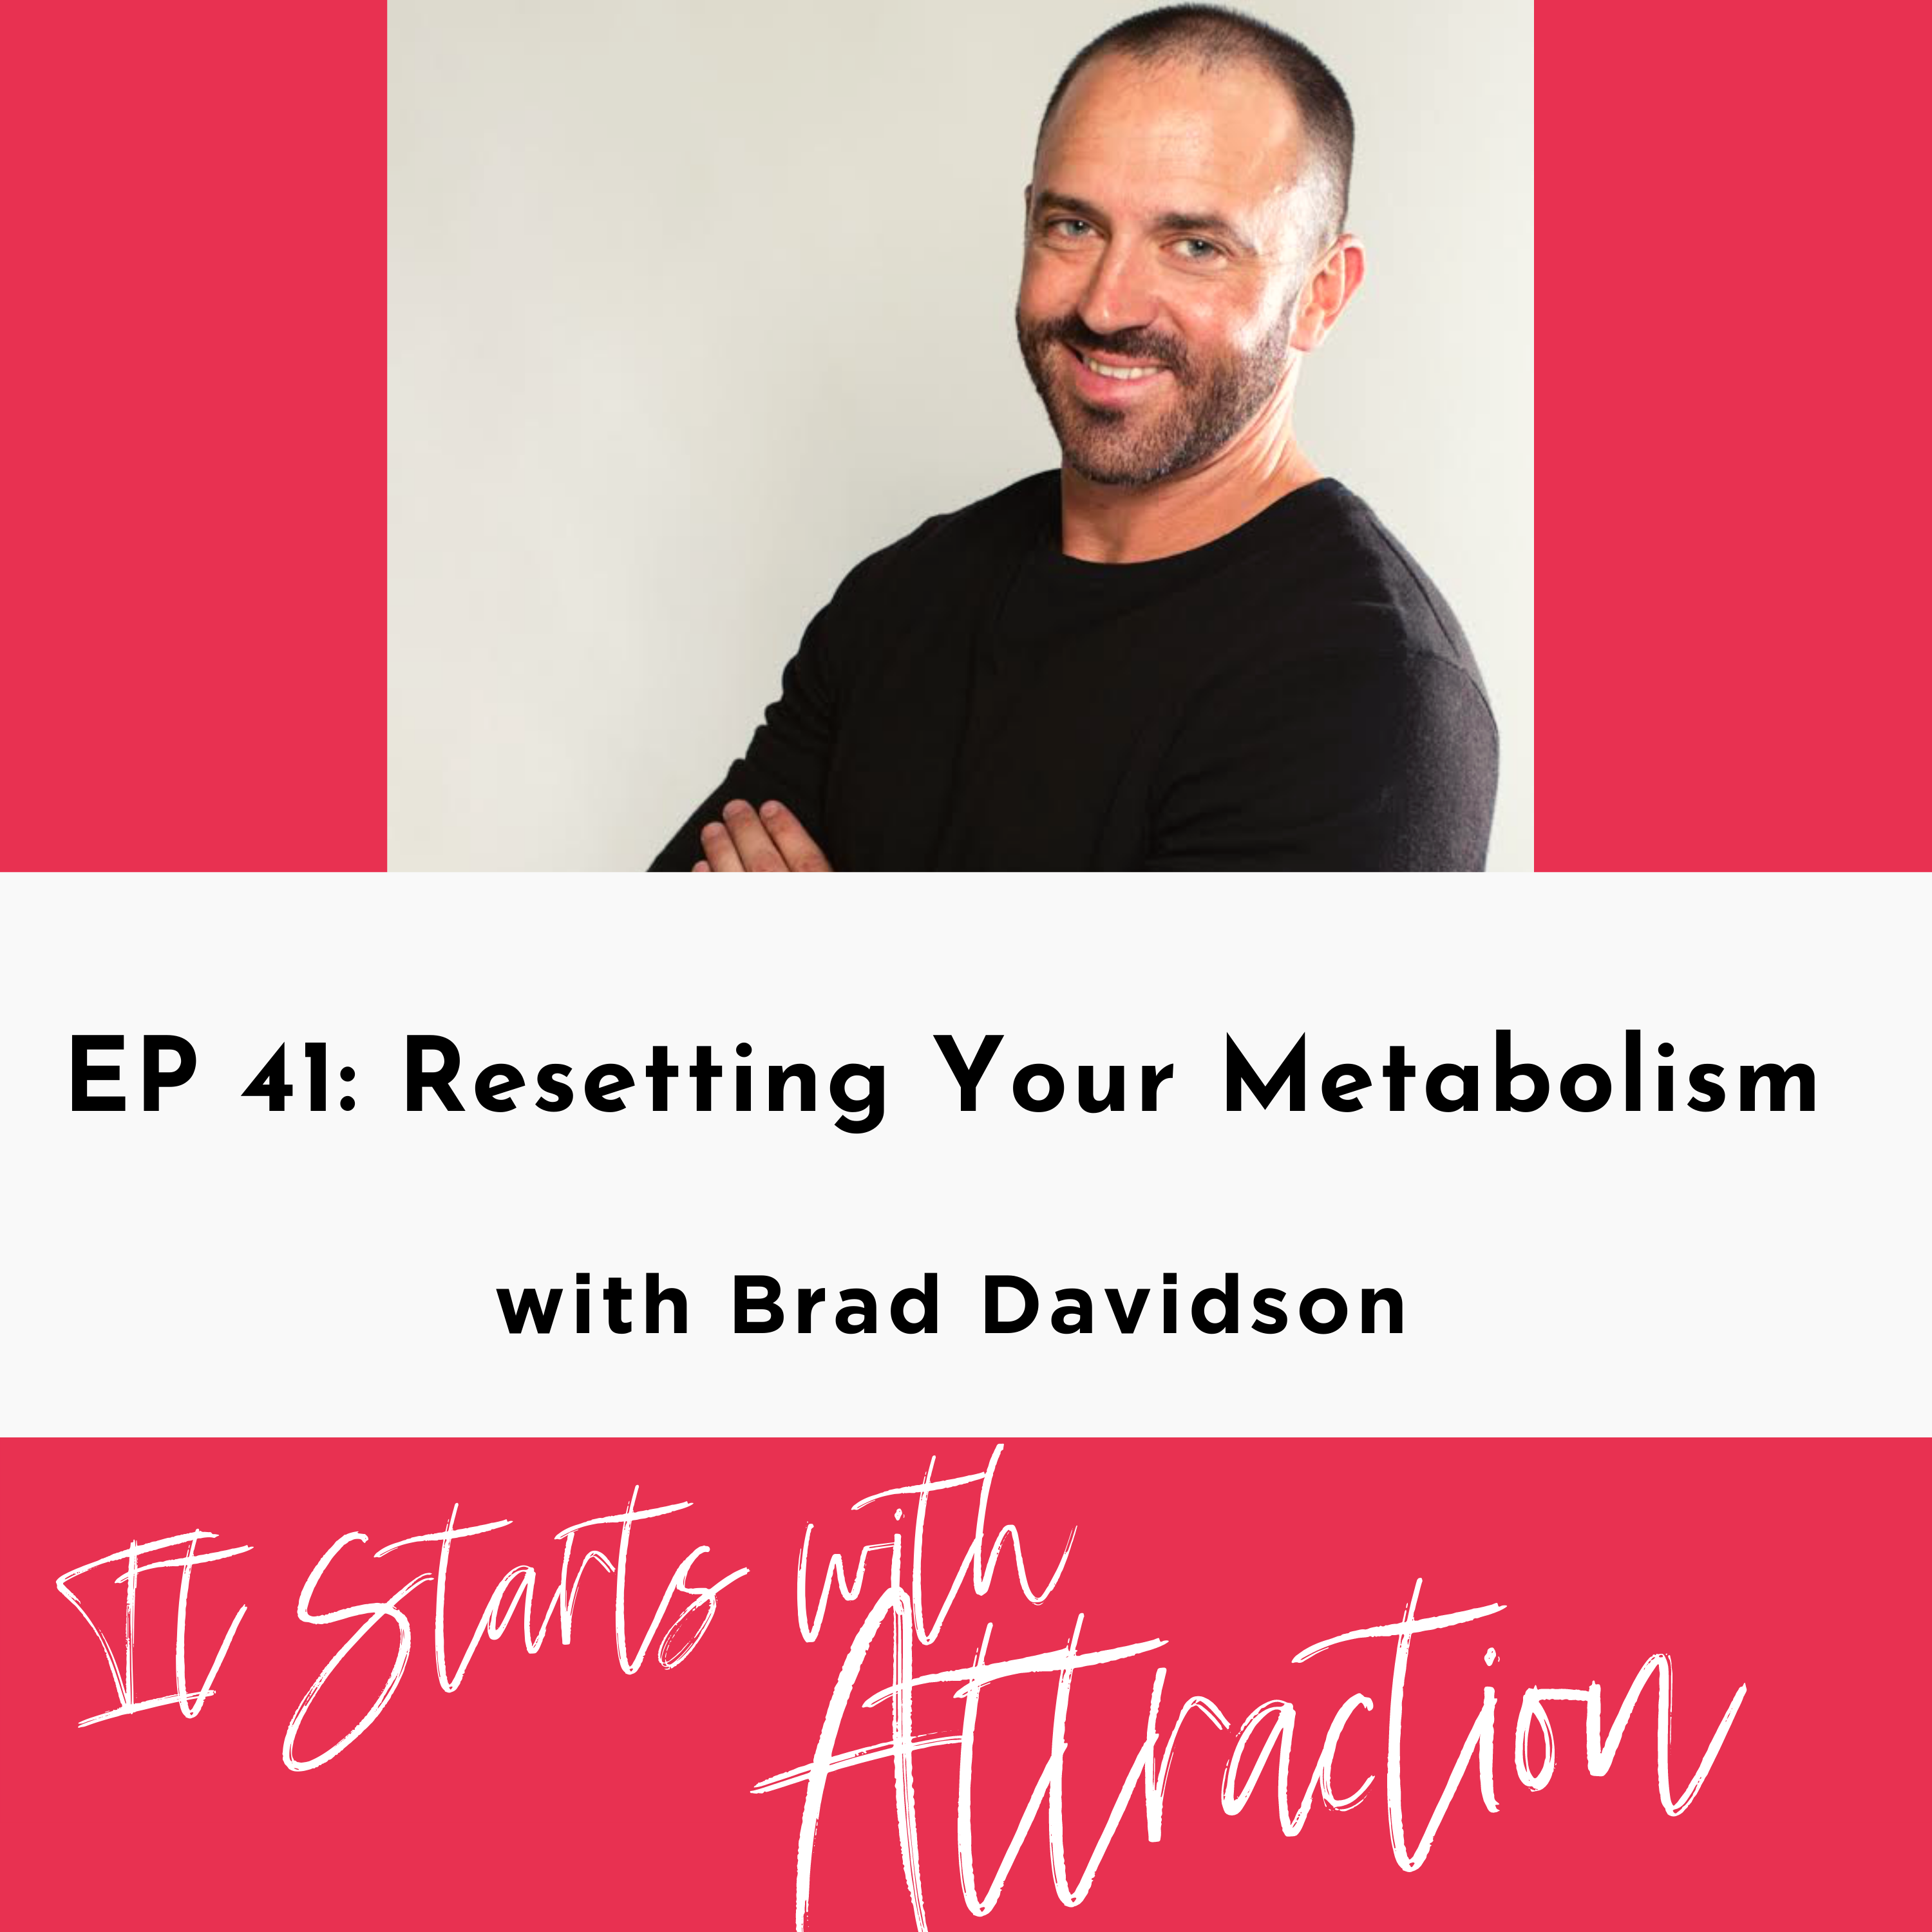 Resetting your metabolism with Brad Davidson